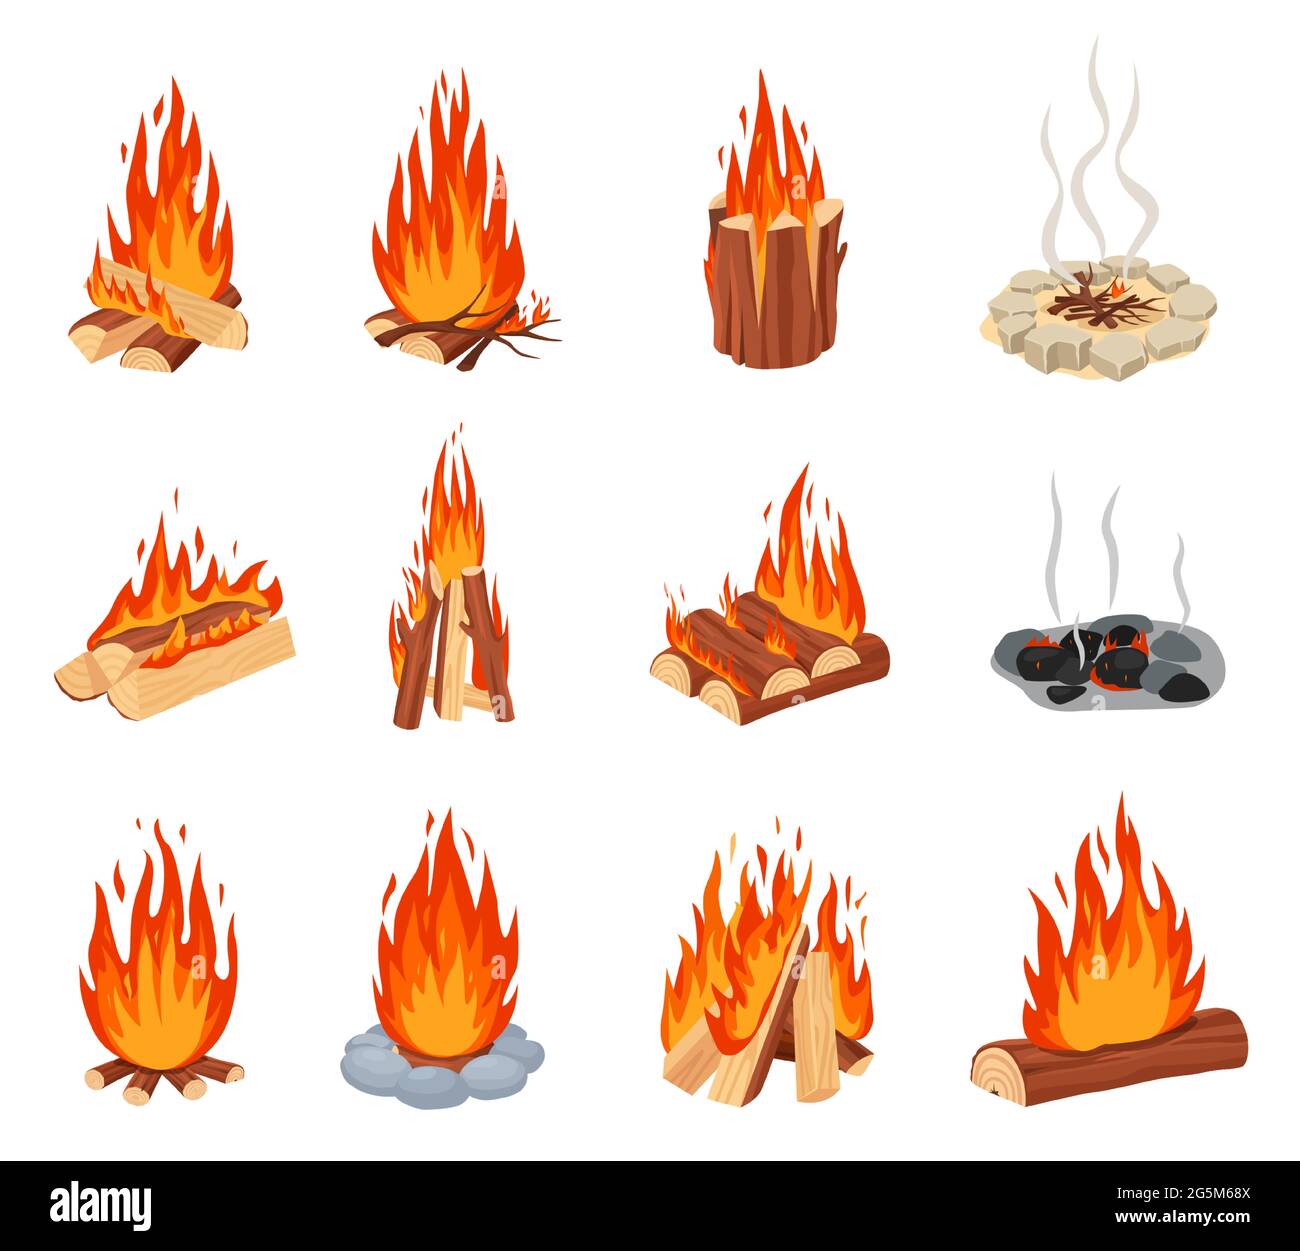 Cartoon bonfires. Outdoor burning fire flames with stone border, burned out bonfire. Forest tourist burning campfire with smoke vector set. Outdoor burning wooden logs, camping fireplace Stock Vector